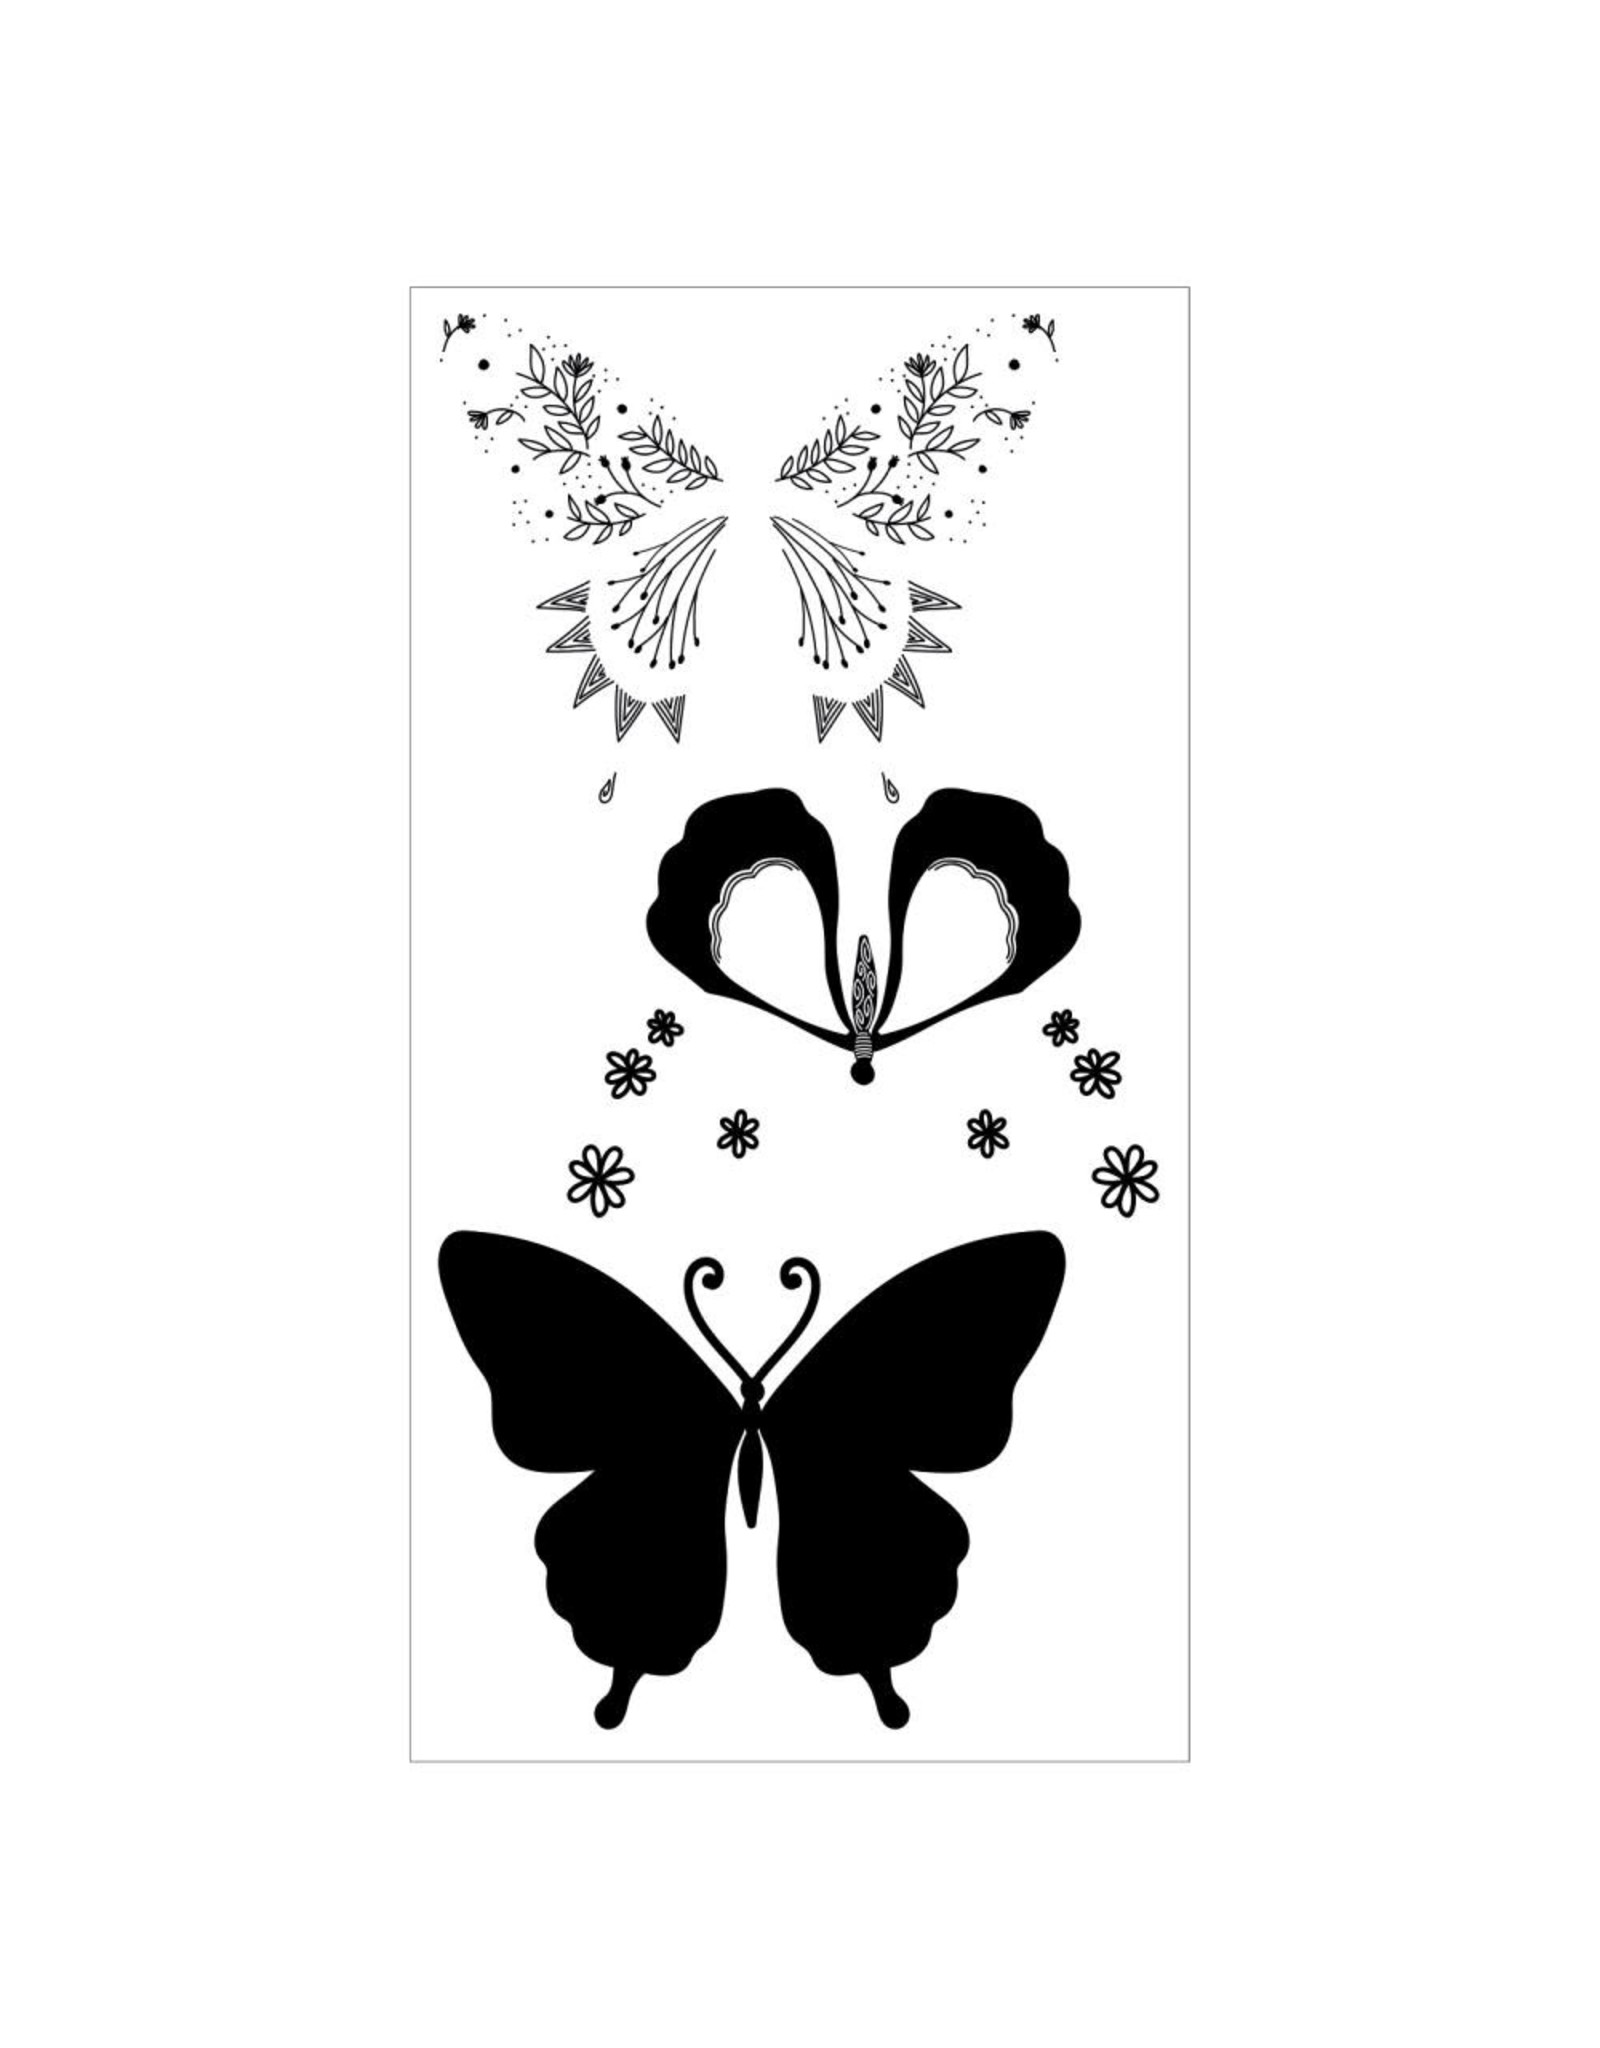 Sizzix Decorated Butterfly - Sizzix Clear Stamps